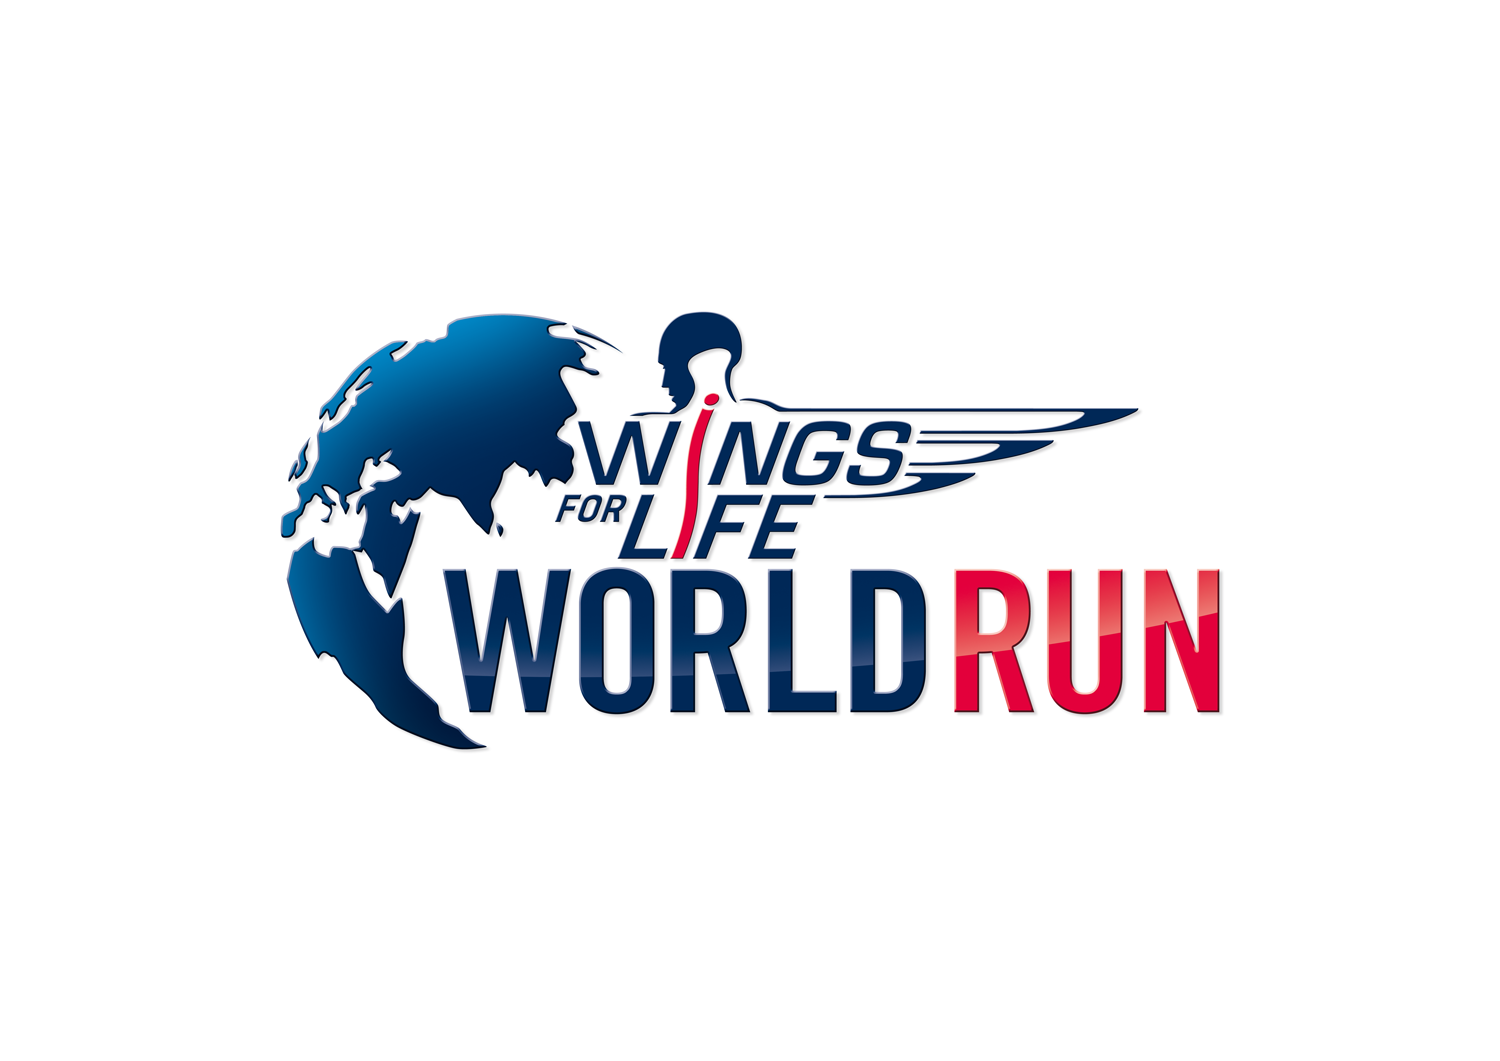 Wings For Life World Run – we run to help!